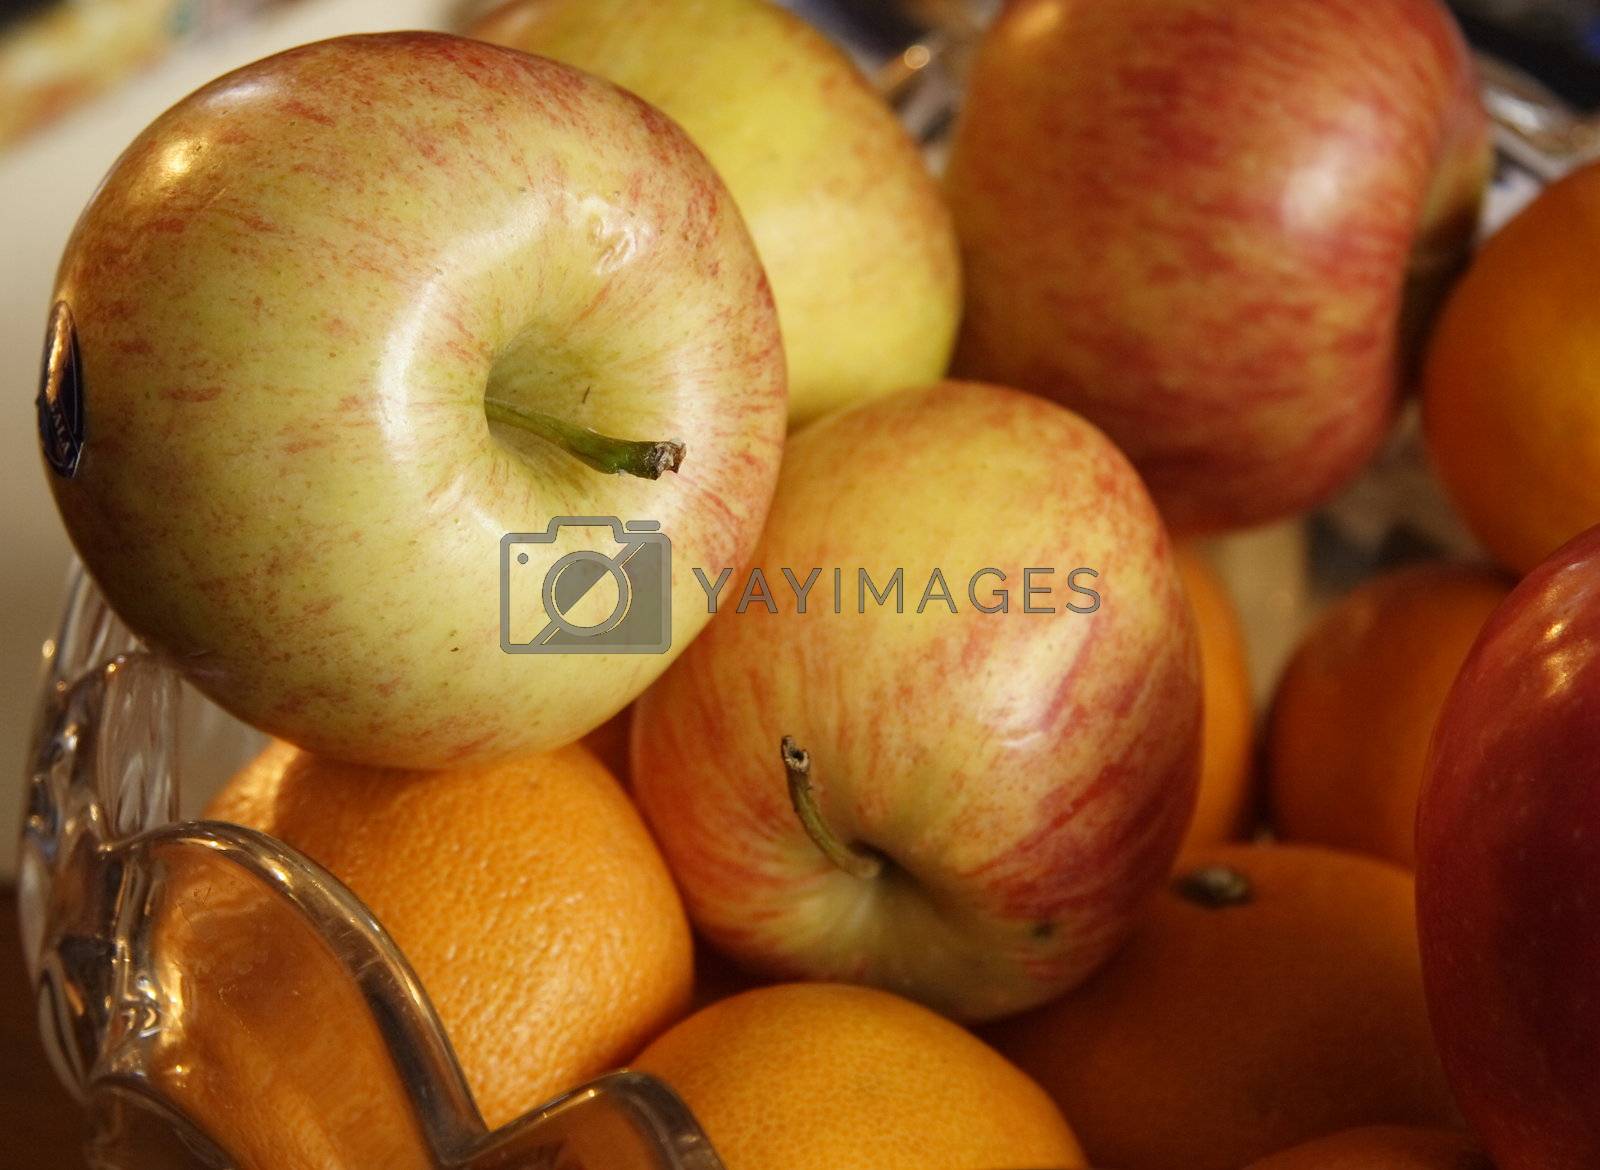 Royalty free image of fresh apples and oranges by leafy